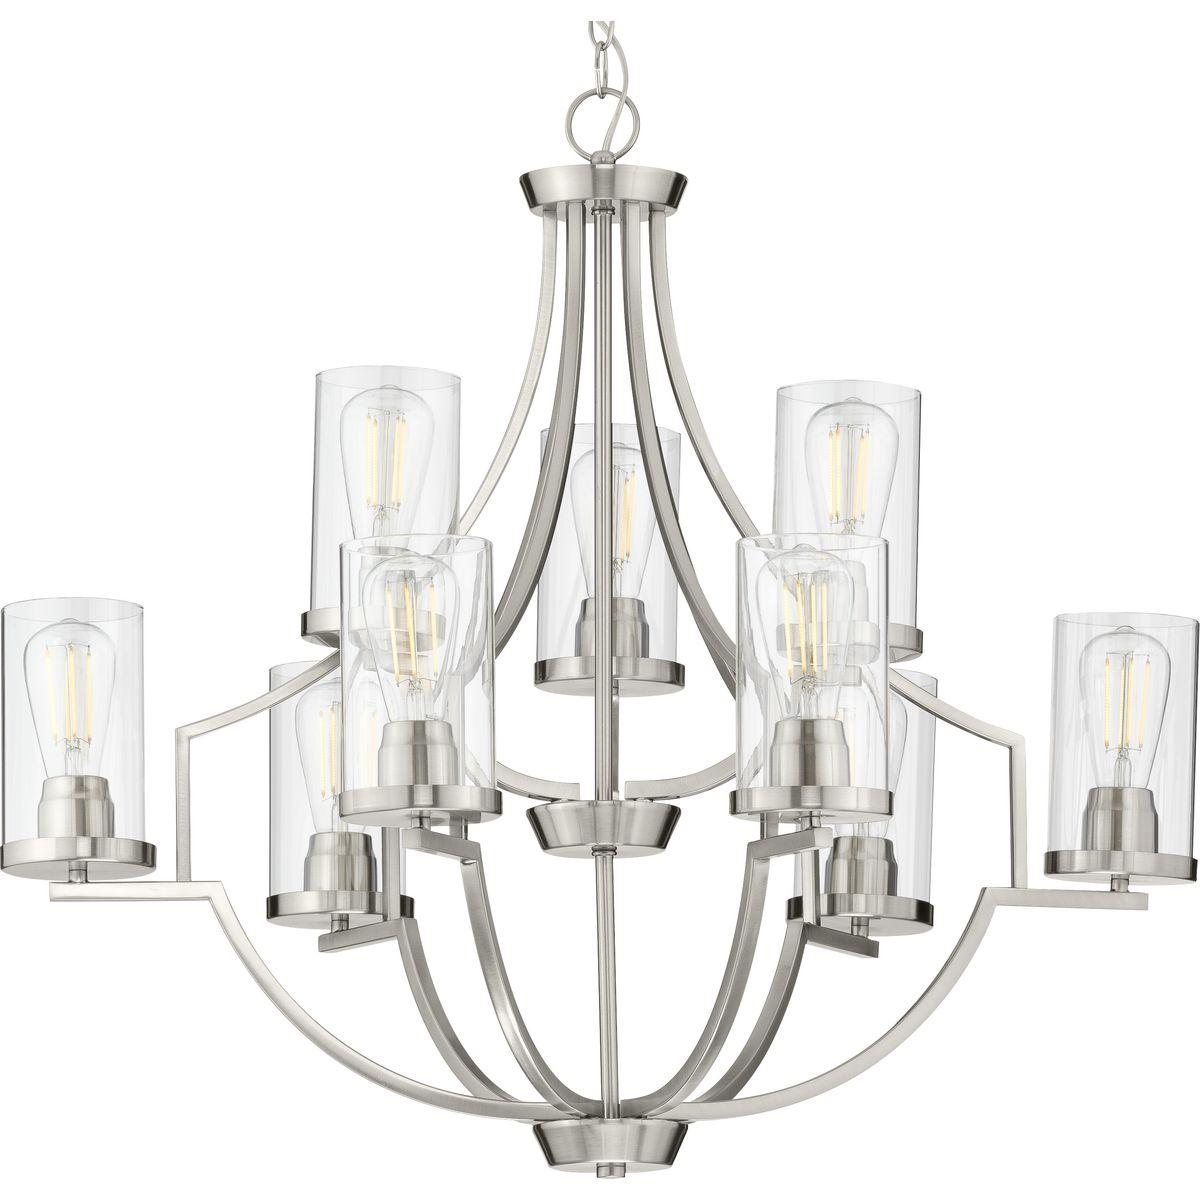 Hubbell P400198-009 Manifest a swoon-worthy lighting experience with the stunning blend of the modern and traditional styles in this one-of-a-kind chandelier. Square tubing with clean, sharp angles is coated in a beautiful brushed nickel finish that demands your attention. S